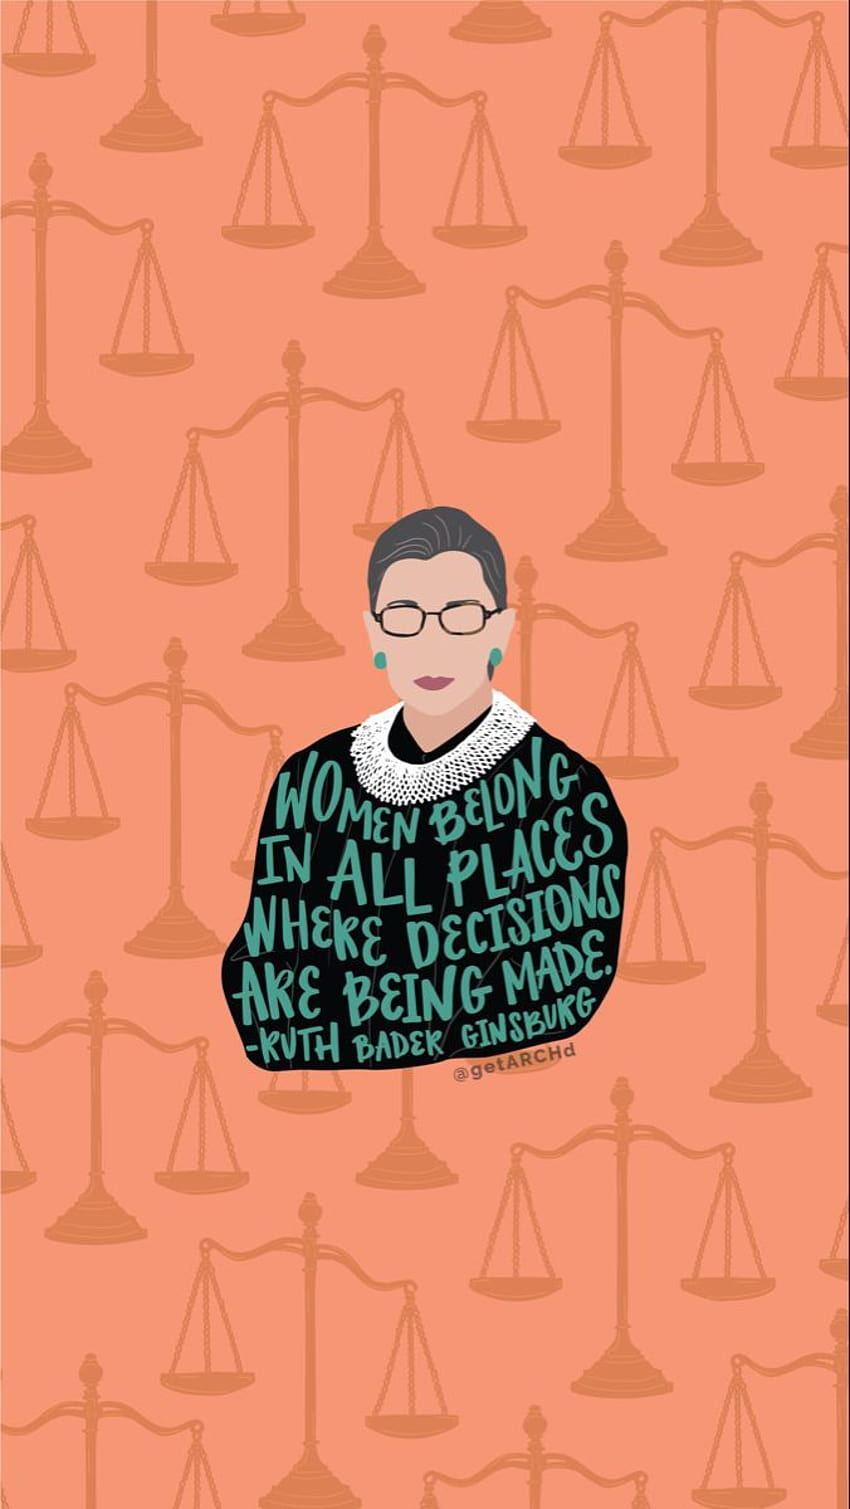 Ruth Bader Ginsburg อ้าง Women belong in all places where วอลล์เปเปอร์โทรศัพท์ HD